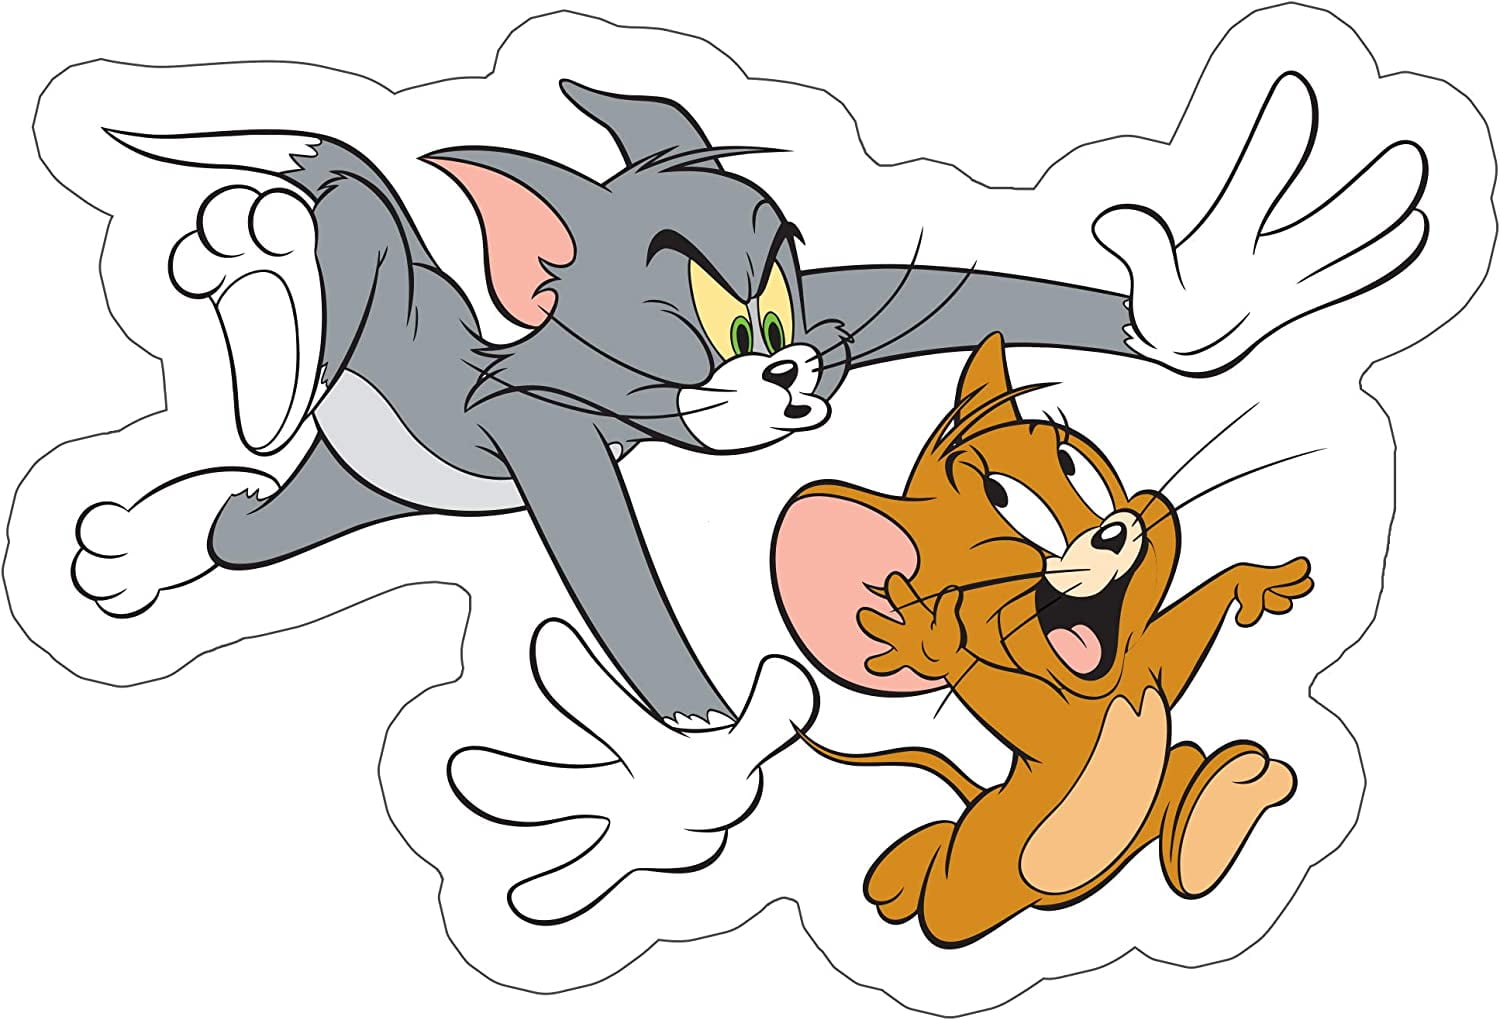 Tom & Jerry Wallpaper 4K, TV series, Tom cat, Jerry mouse